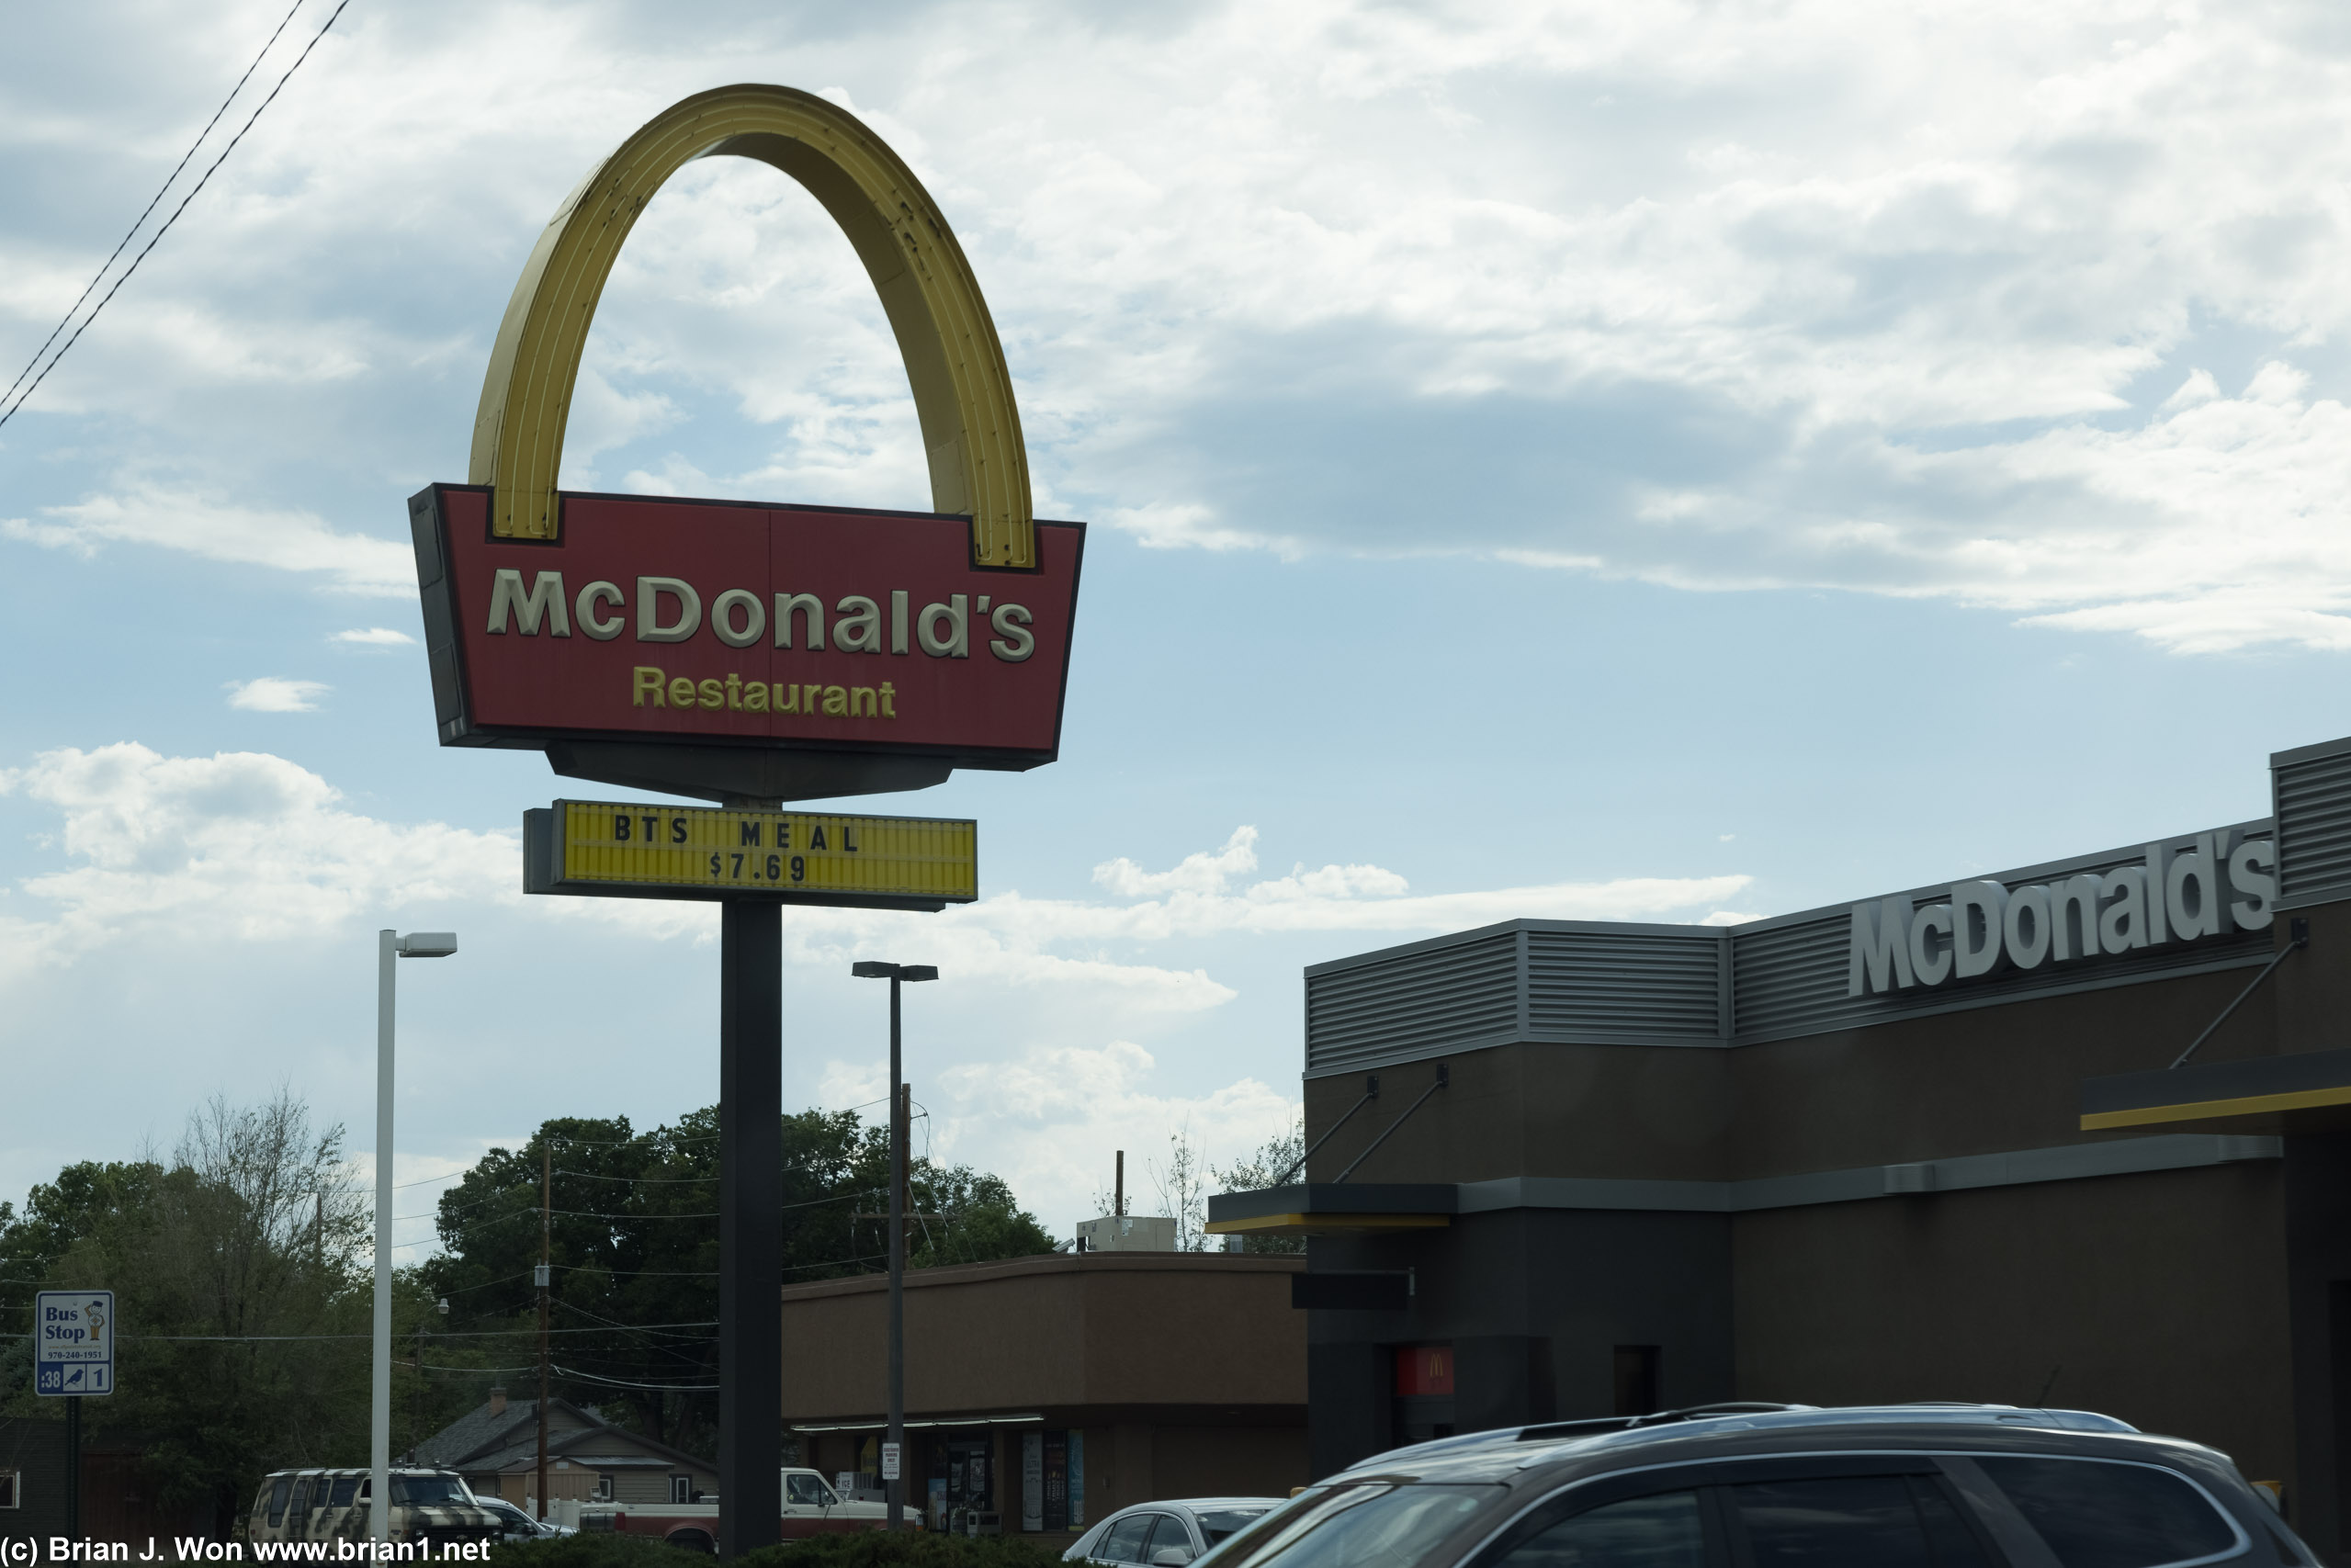 This McDonald's lost an arch.